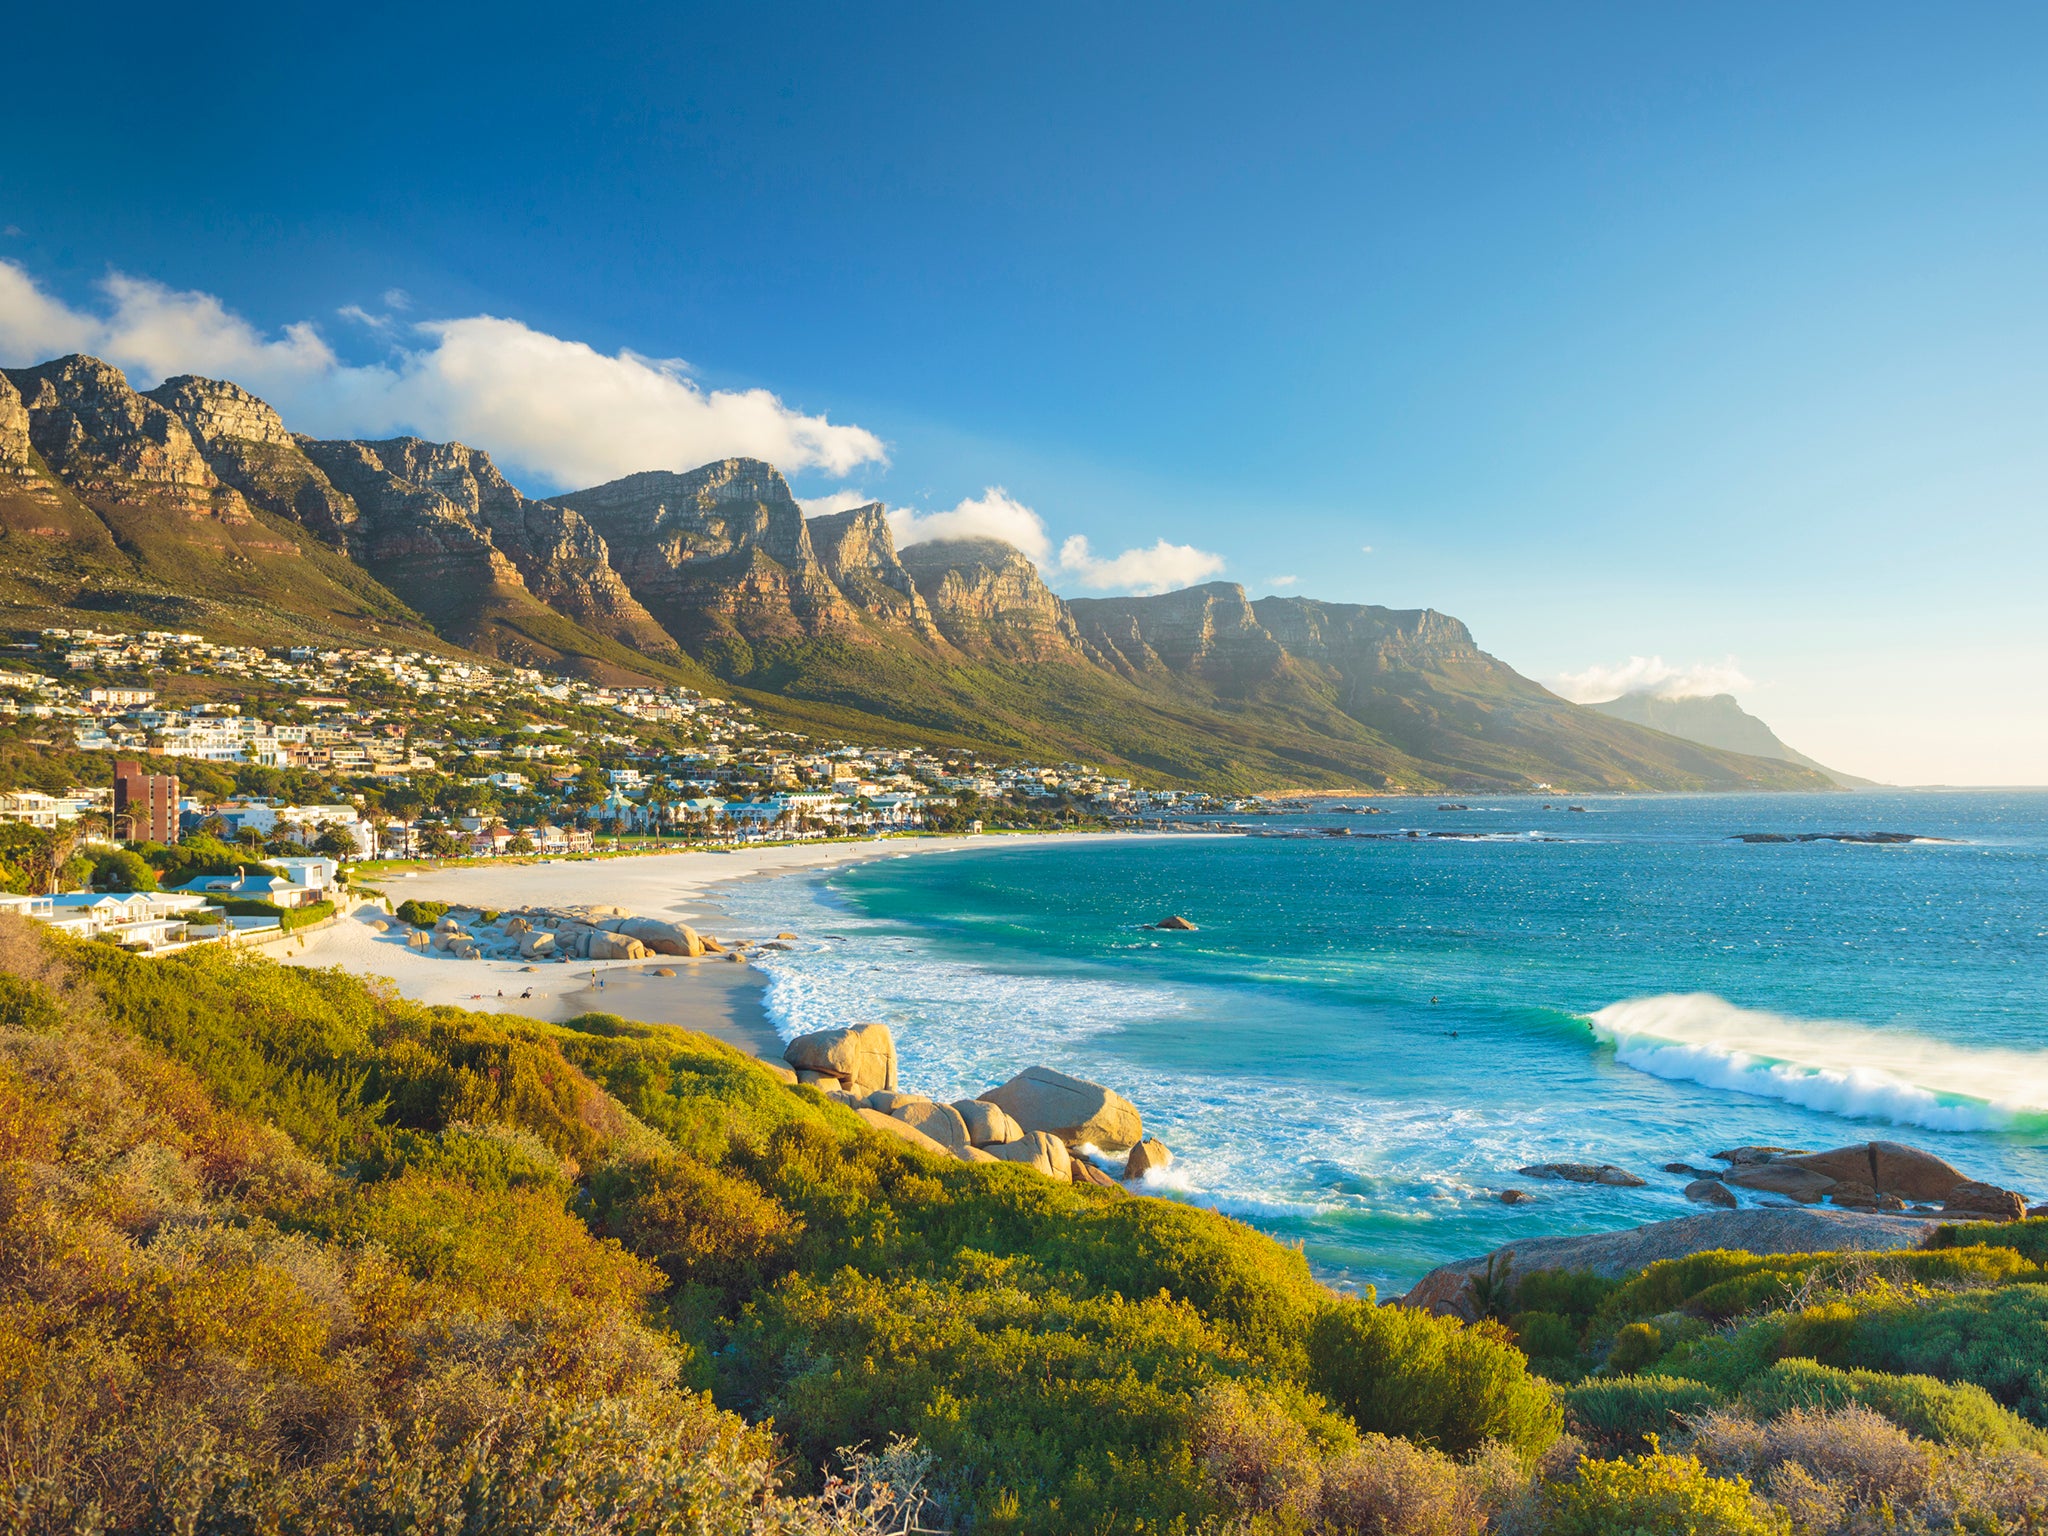 South Africa travel guide: Everything you need to know before you go